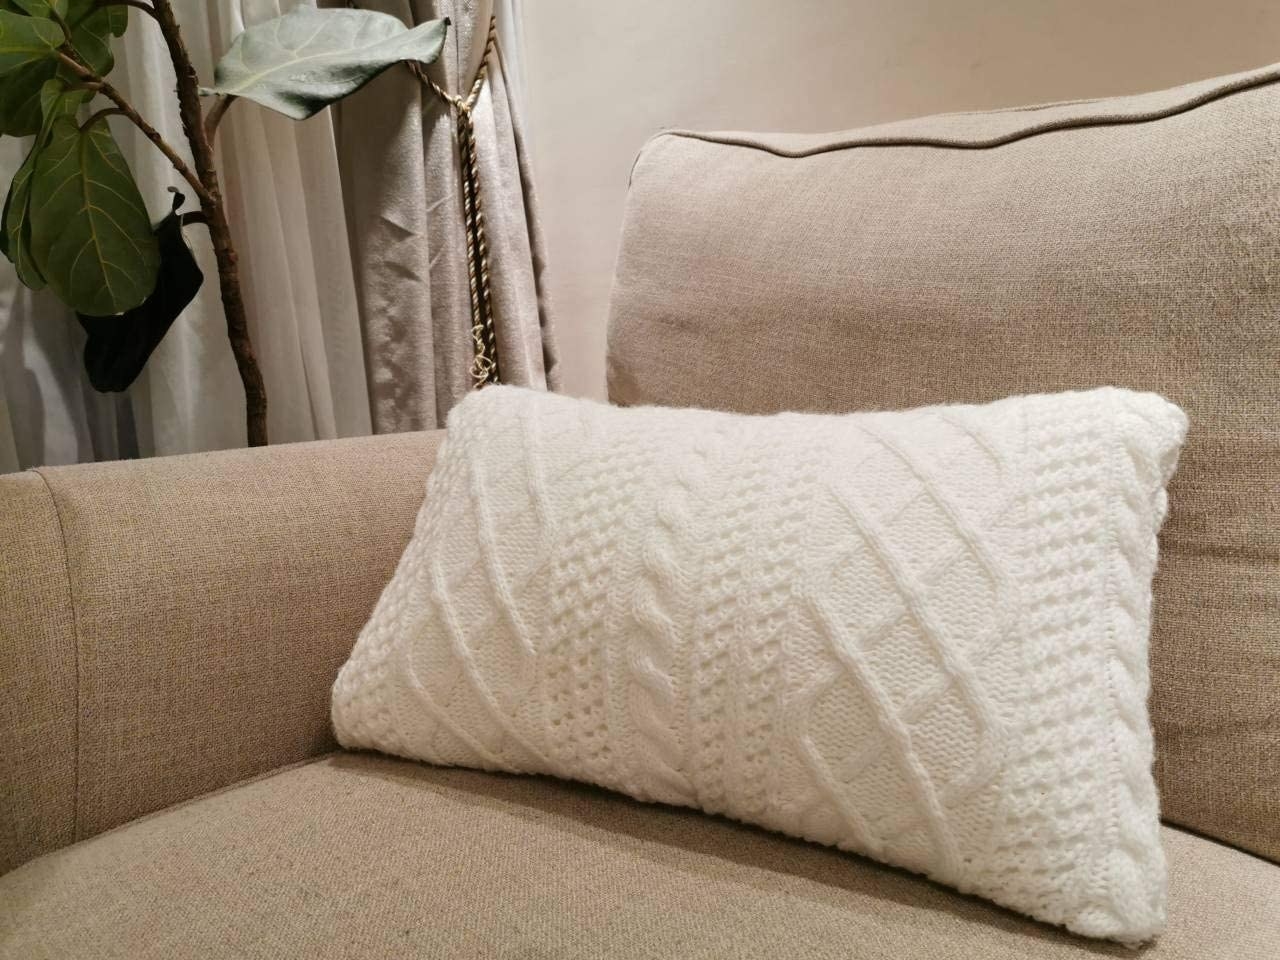 couch with white sweater-like pillow cover on it